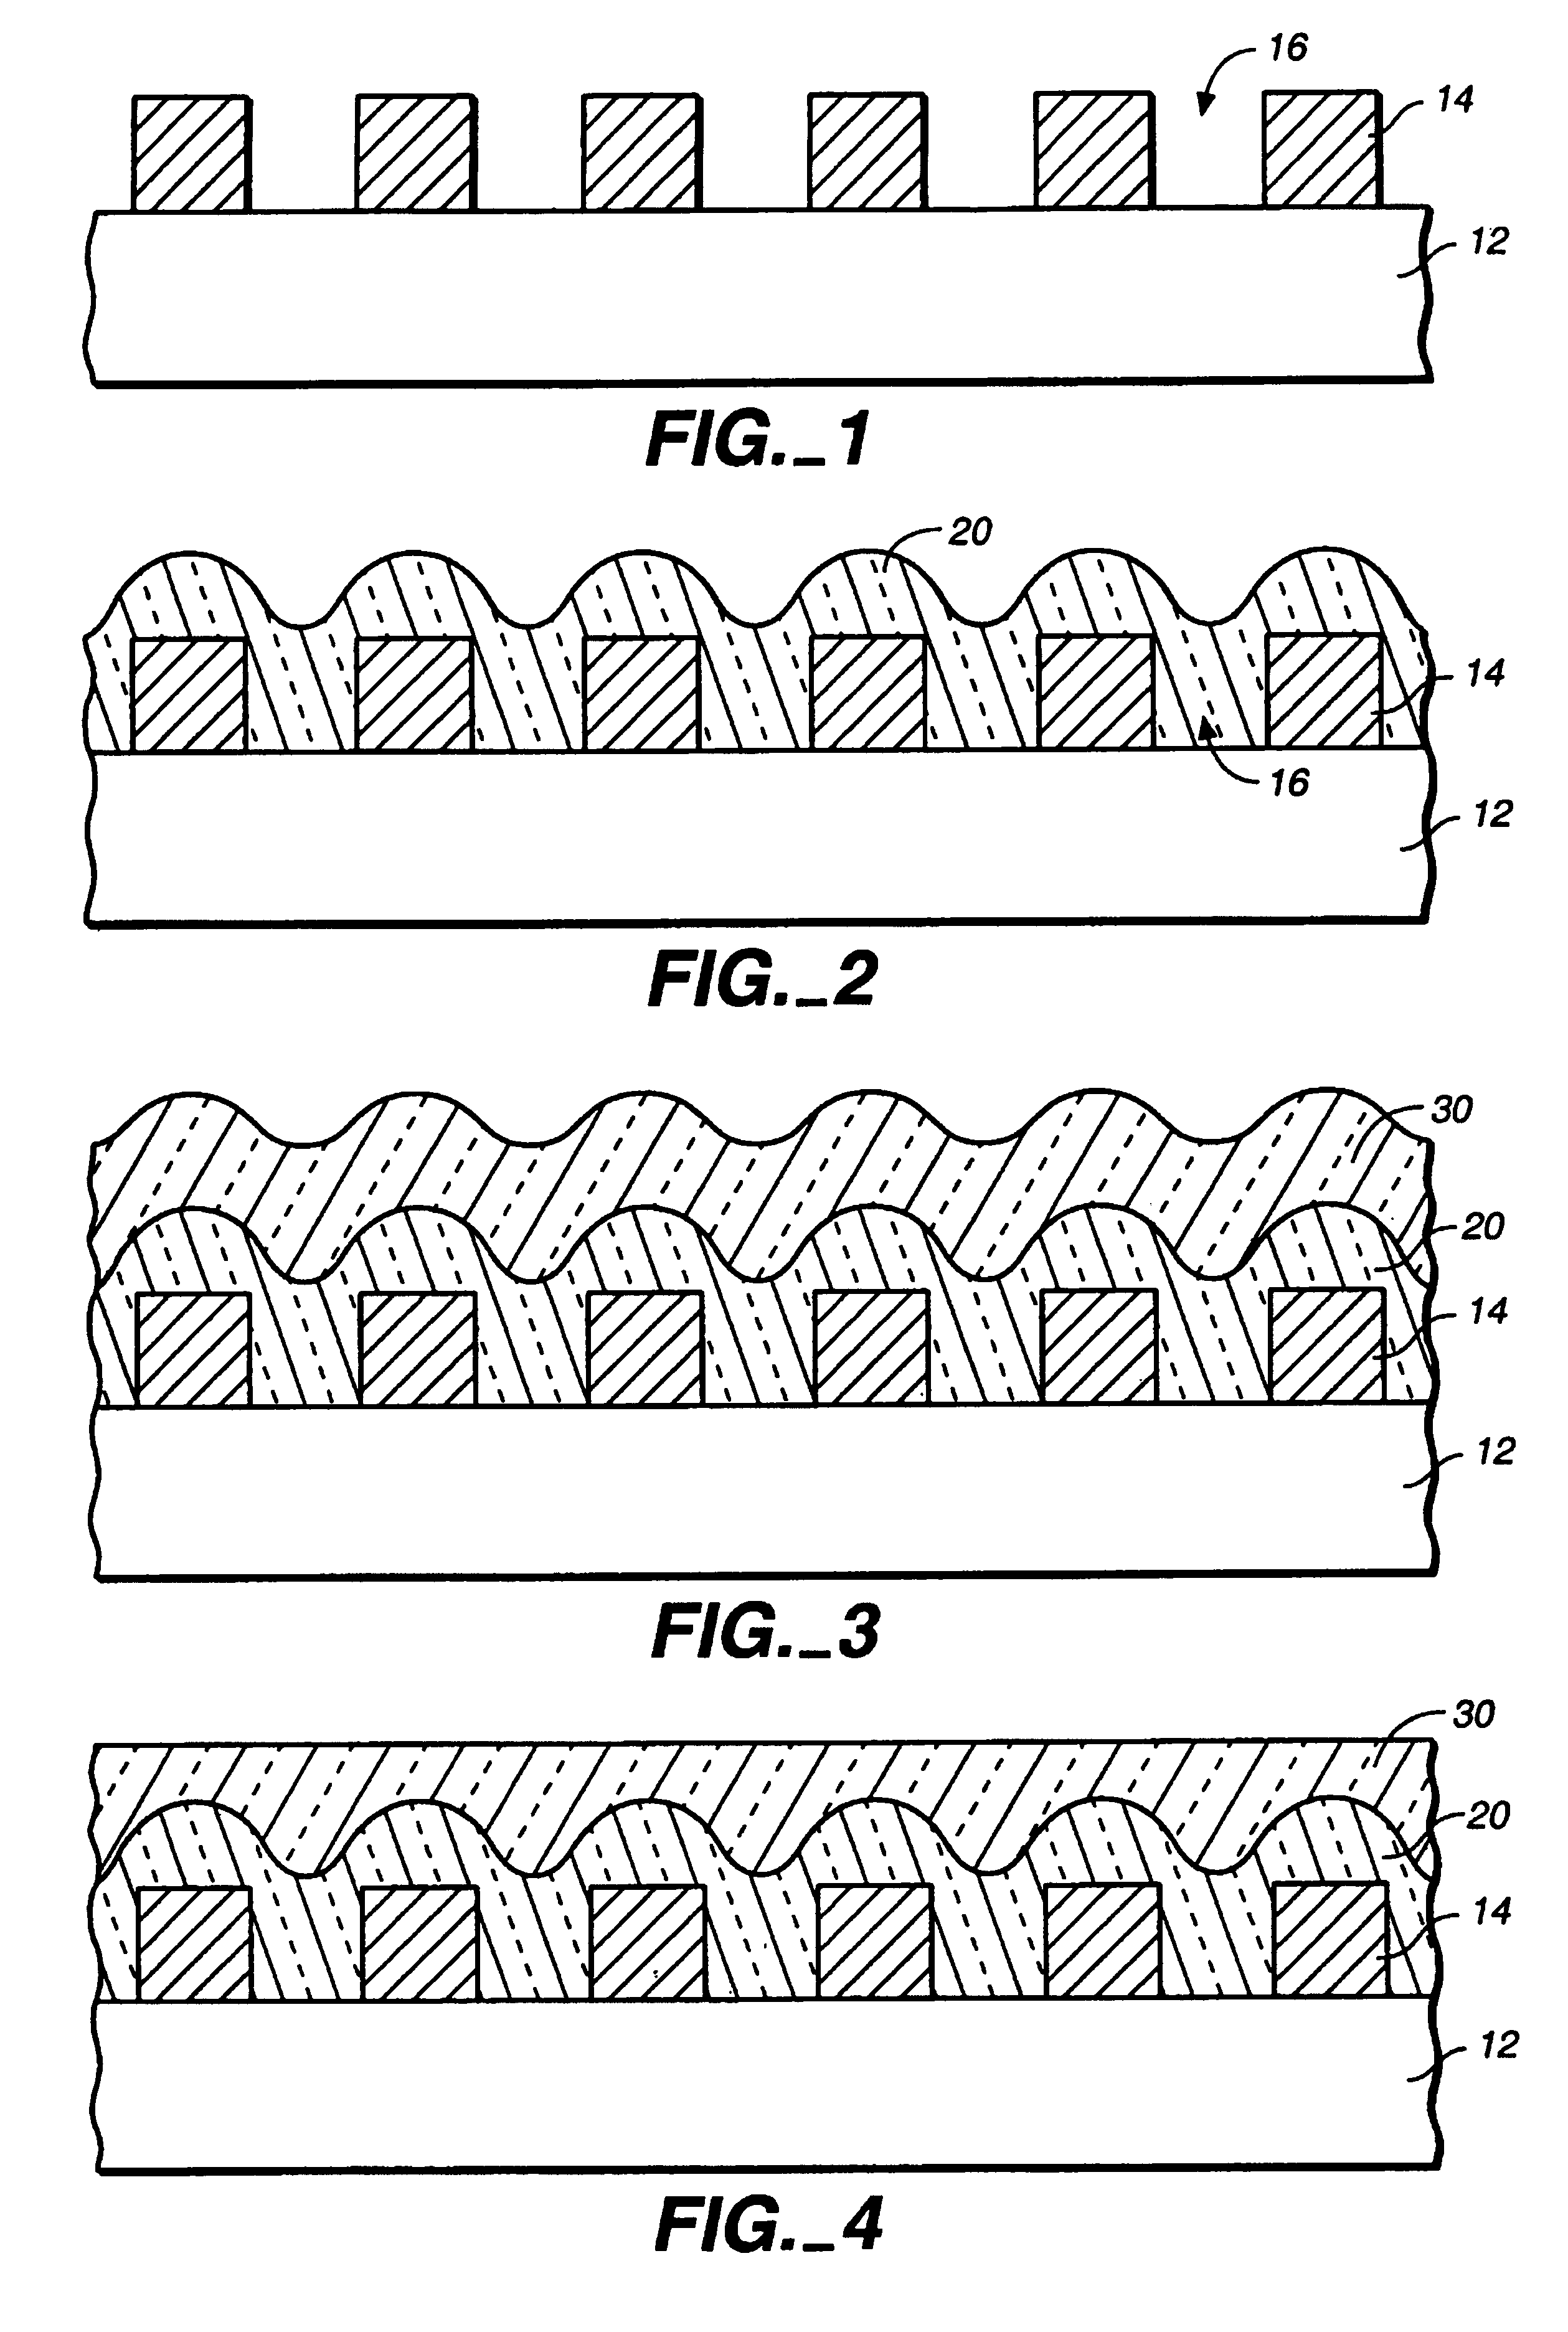 Method of forming pre-metal dielectric film on a semiconductor substrate including first layer of undoped oxide of high ozone:TEOS volume ratio and second layer of low ozone doped BPSG